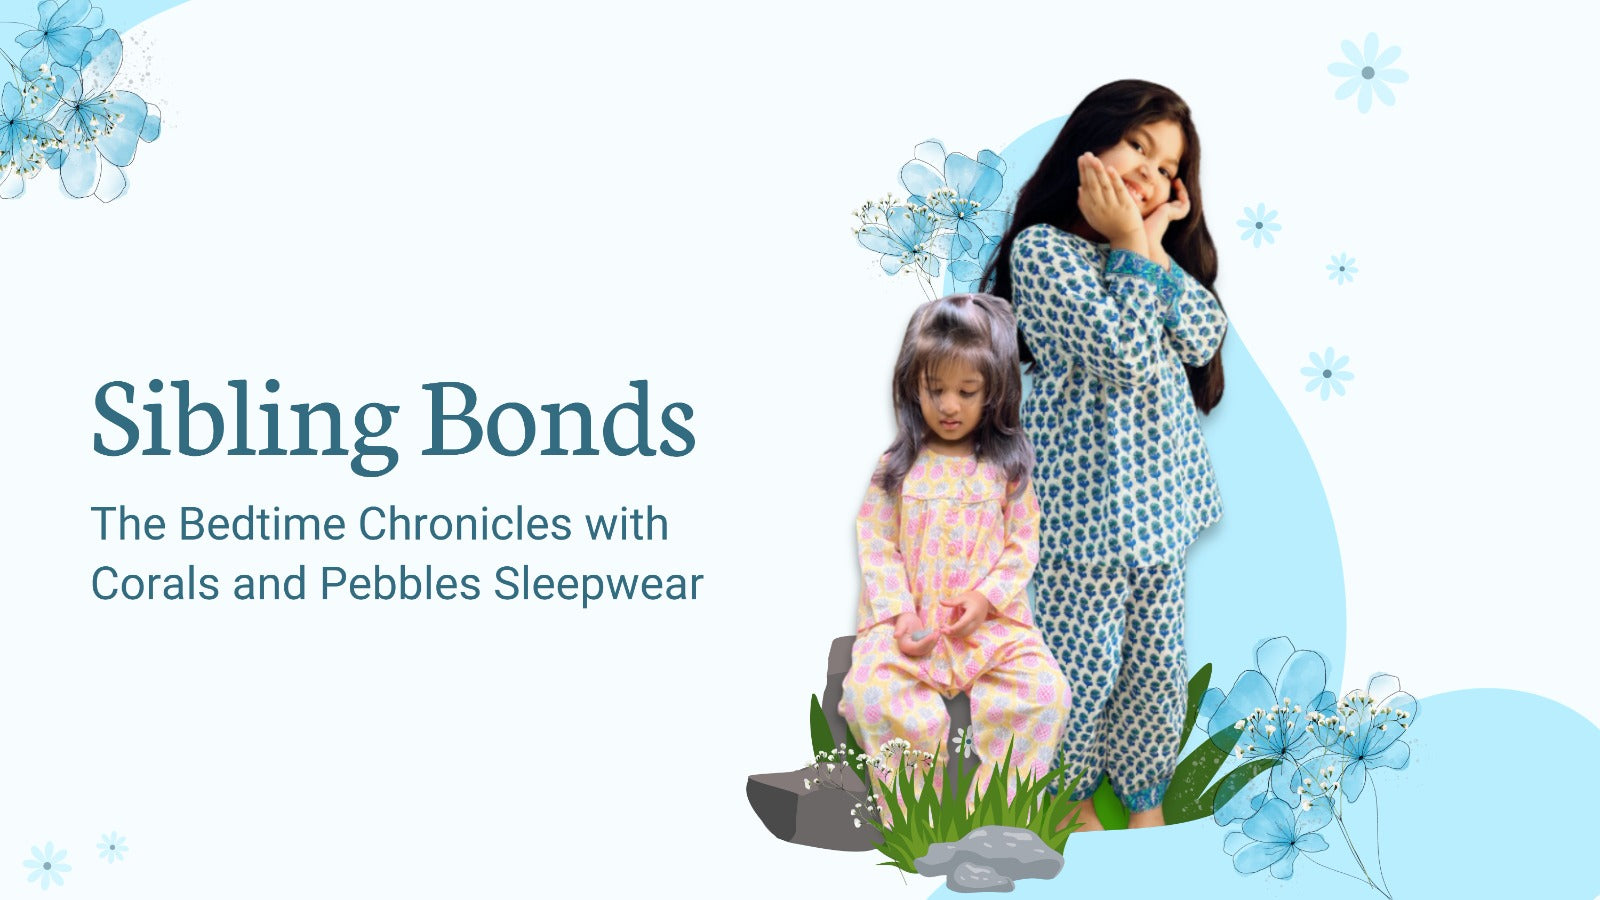 Sibling Bonds: The Bedtime Chronicles with Corals and Pebbles Sleepwear